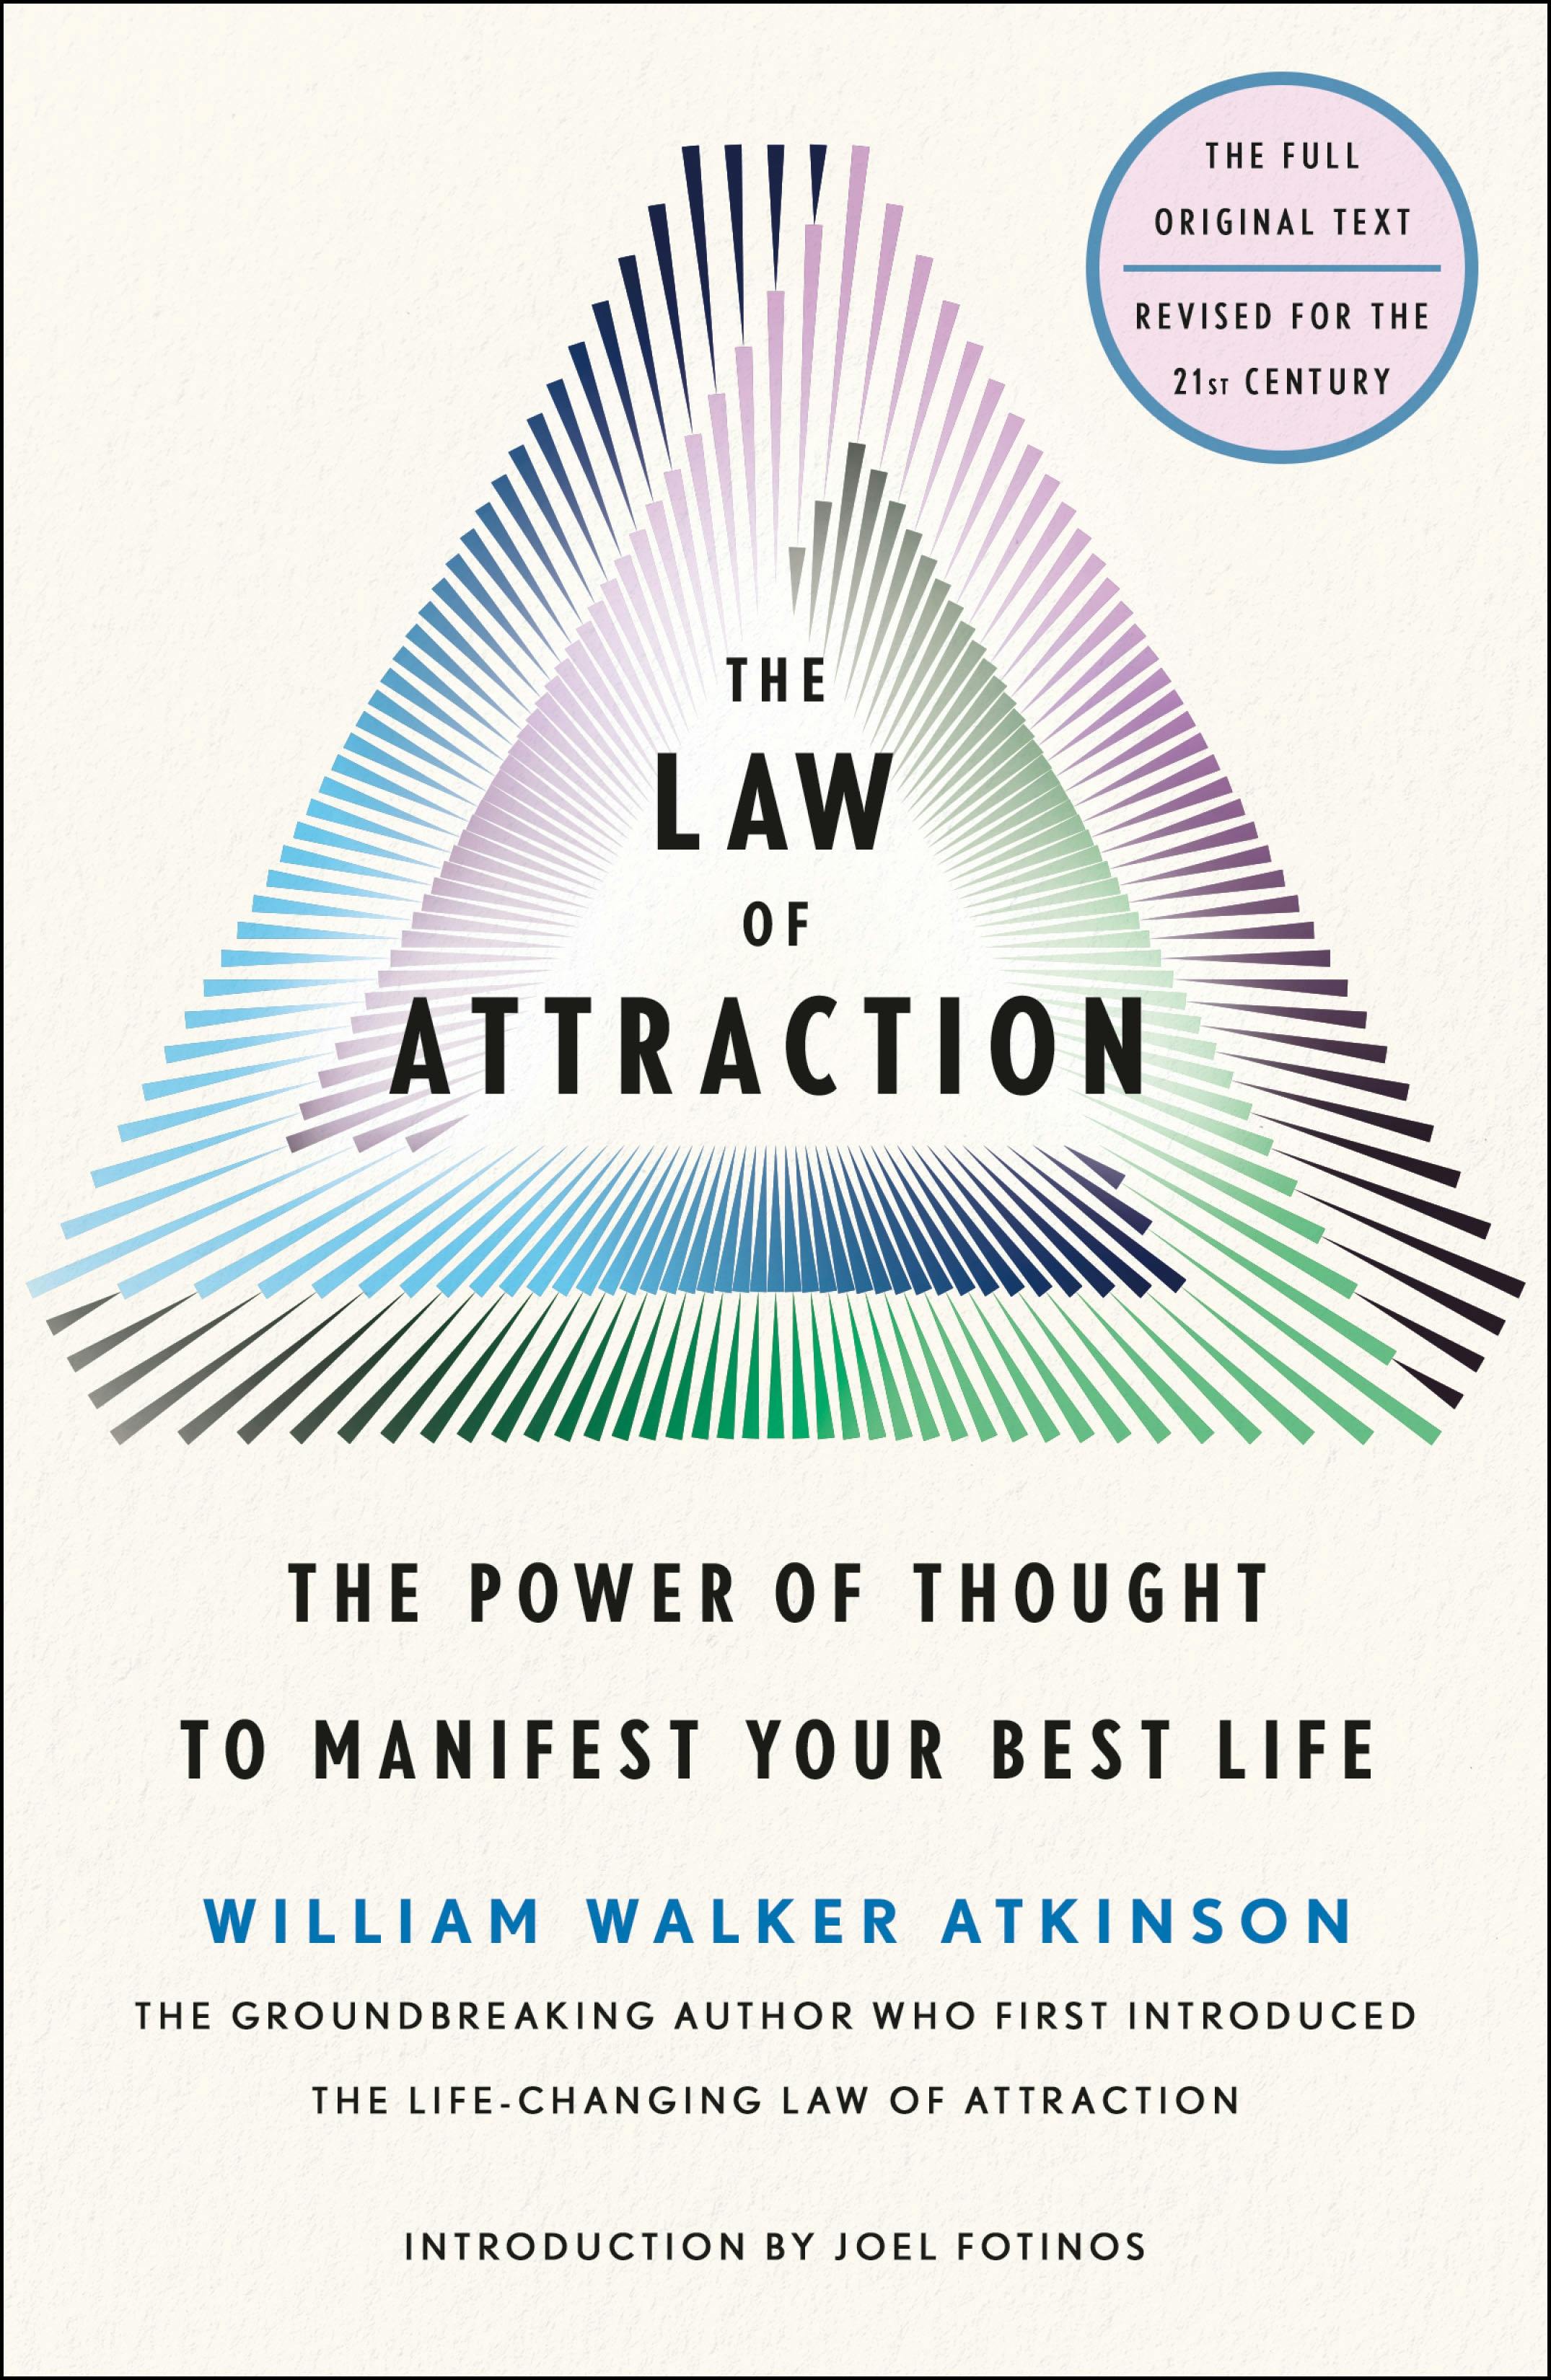 research on law of attraction